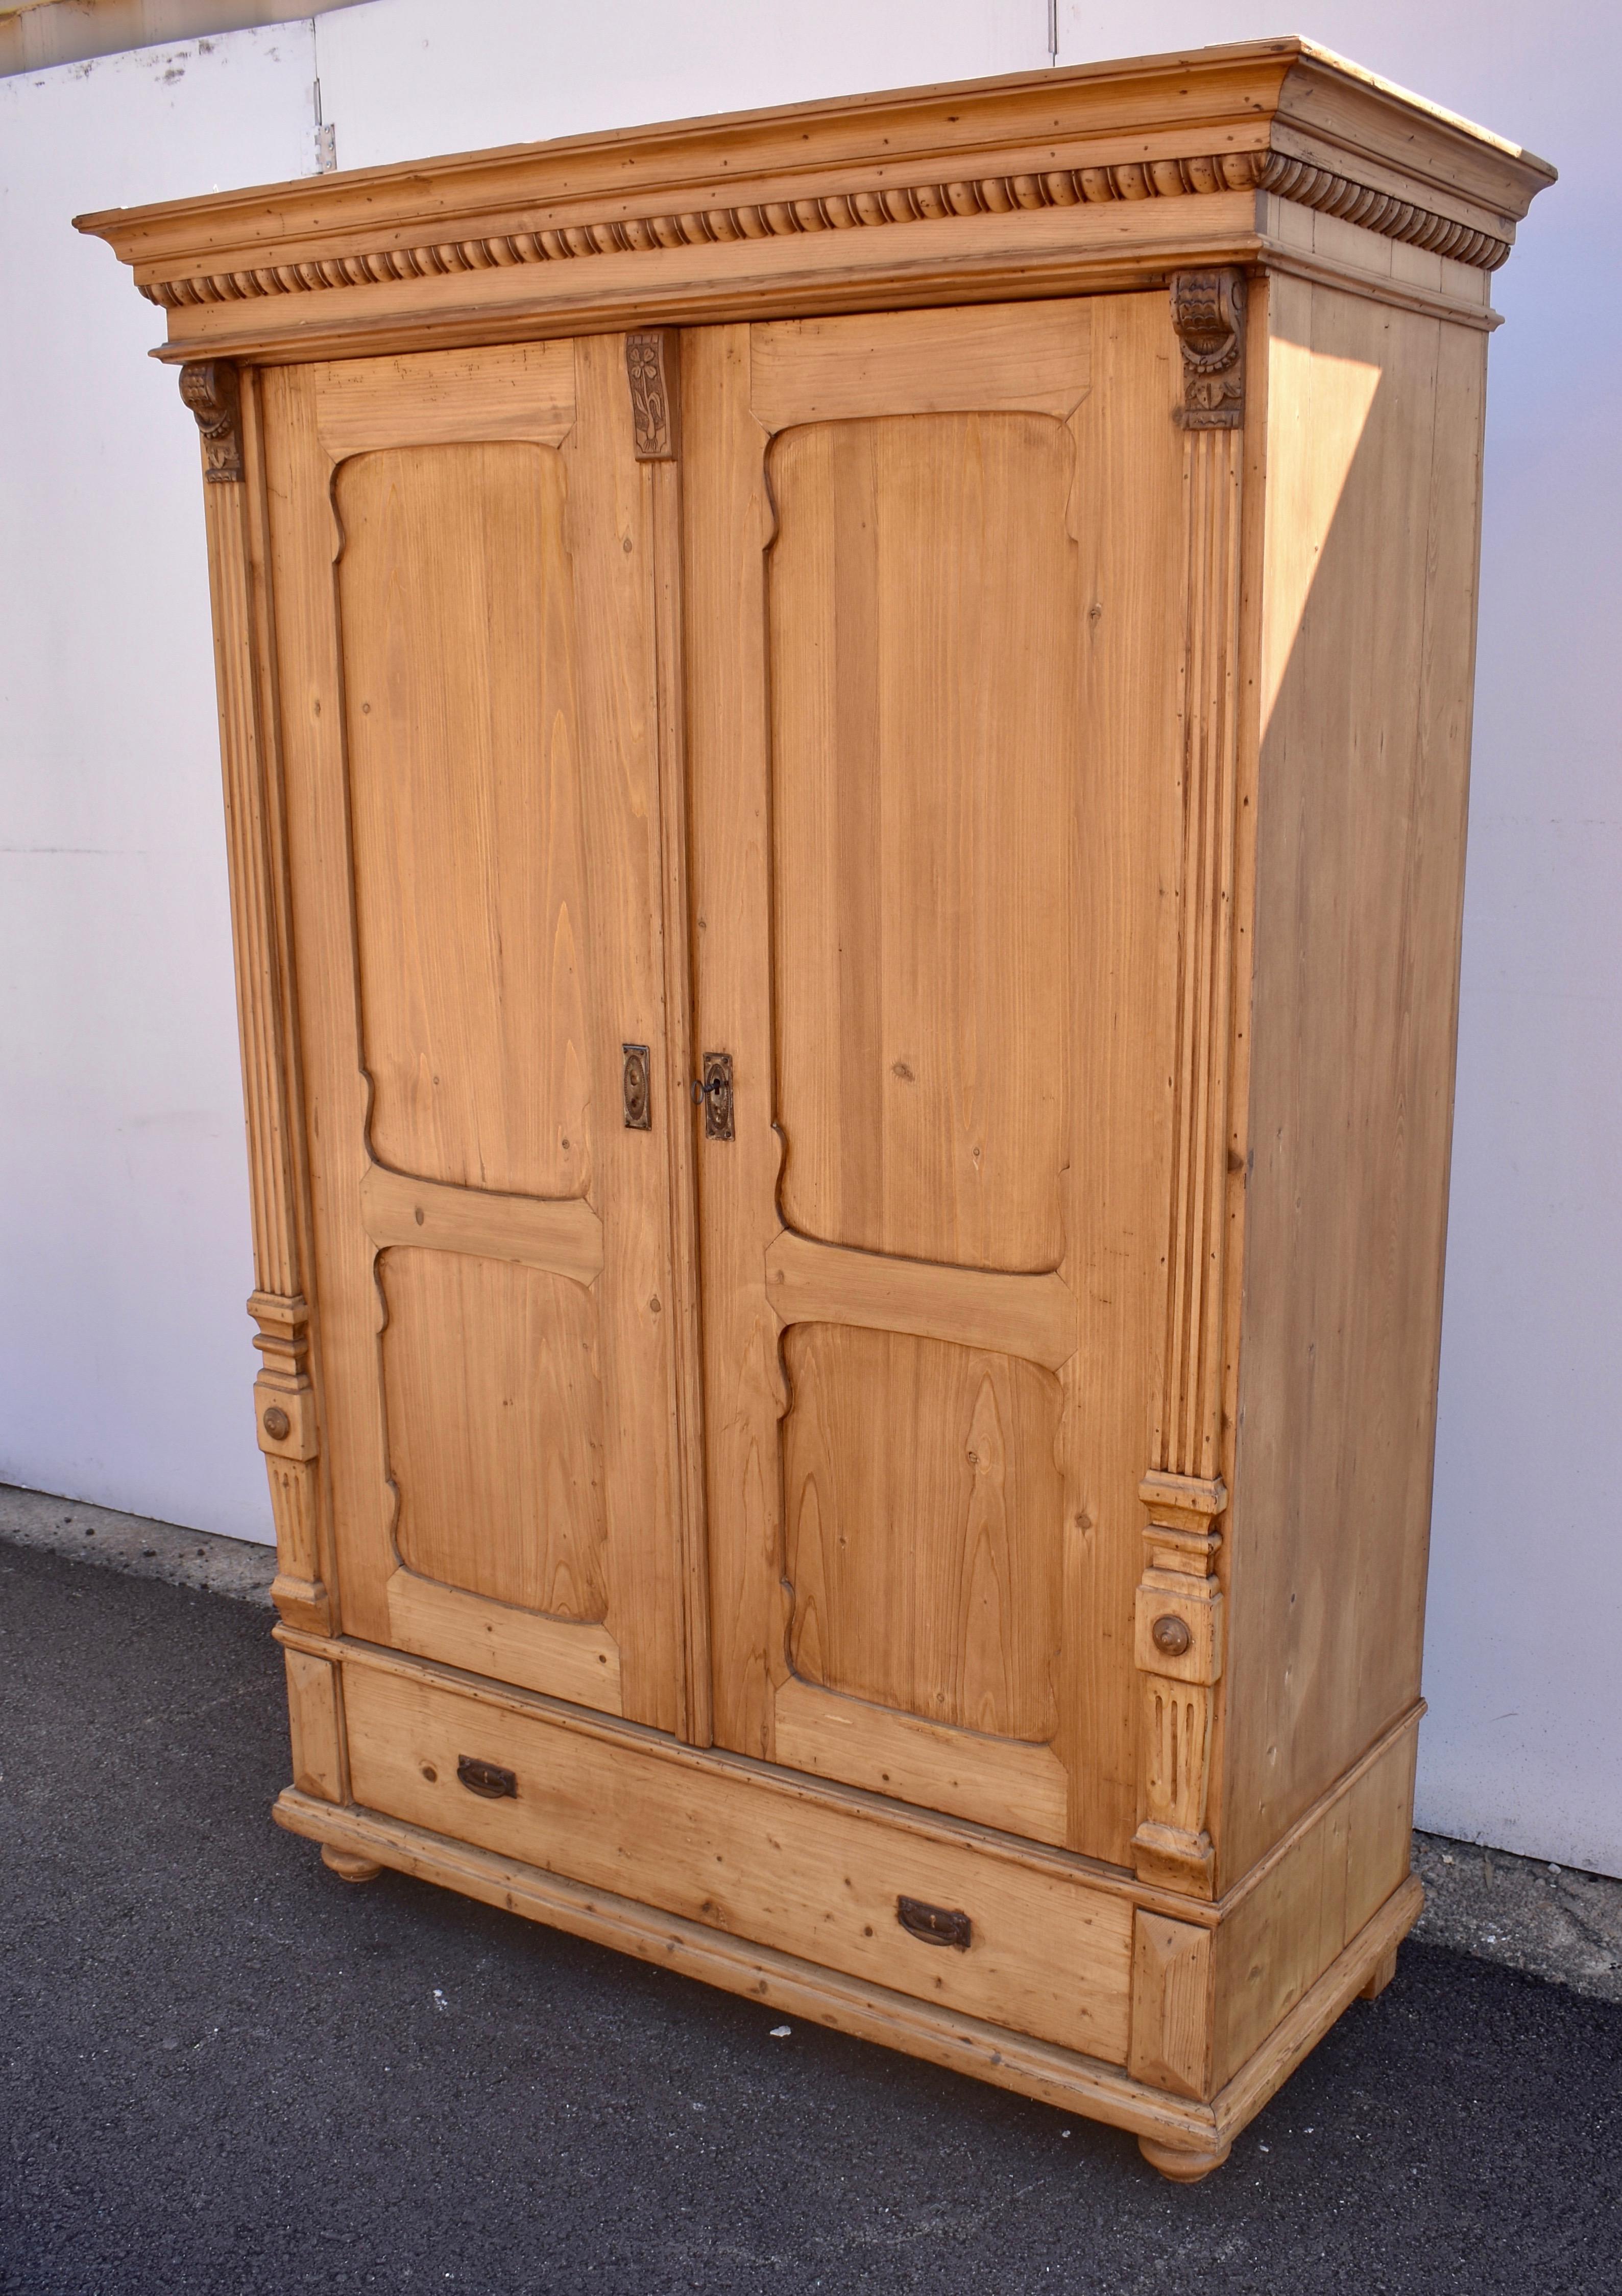 This is a truly extraordinary armoire. The classic reverse-swept crown molding is embellished with bold egg-and-dart type beading beneath, and rests upon two pivot-hinged doors. Each door has two flat panels in scalloped frames, giving the piece a